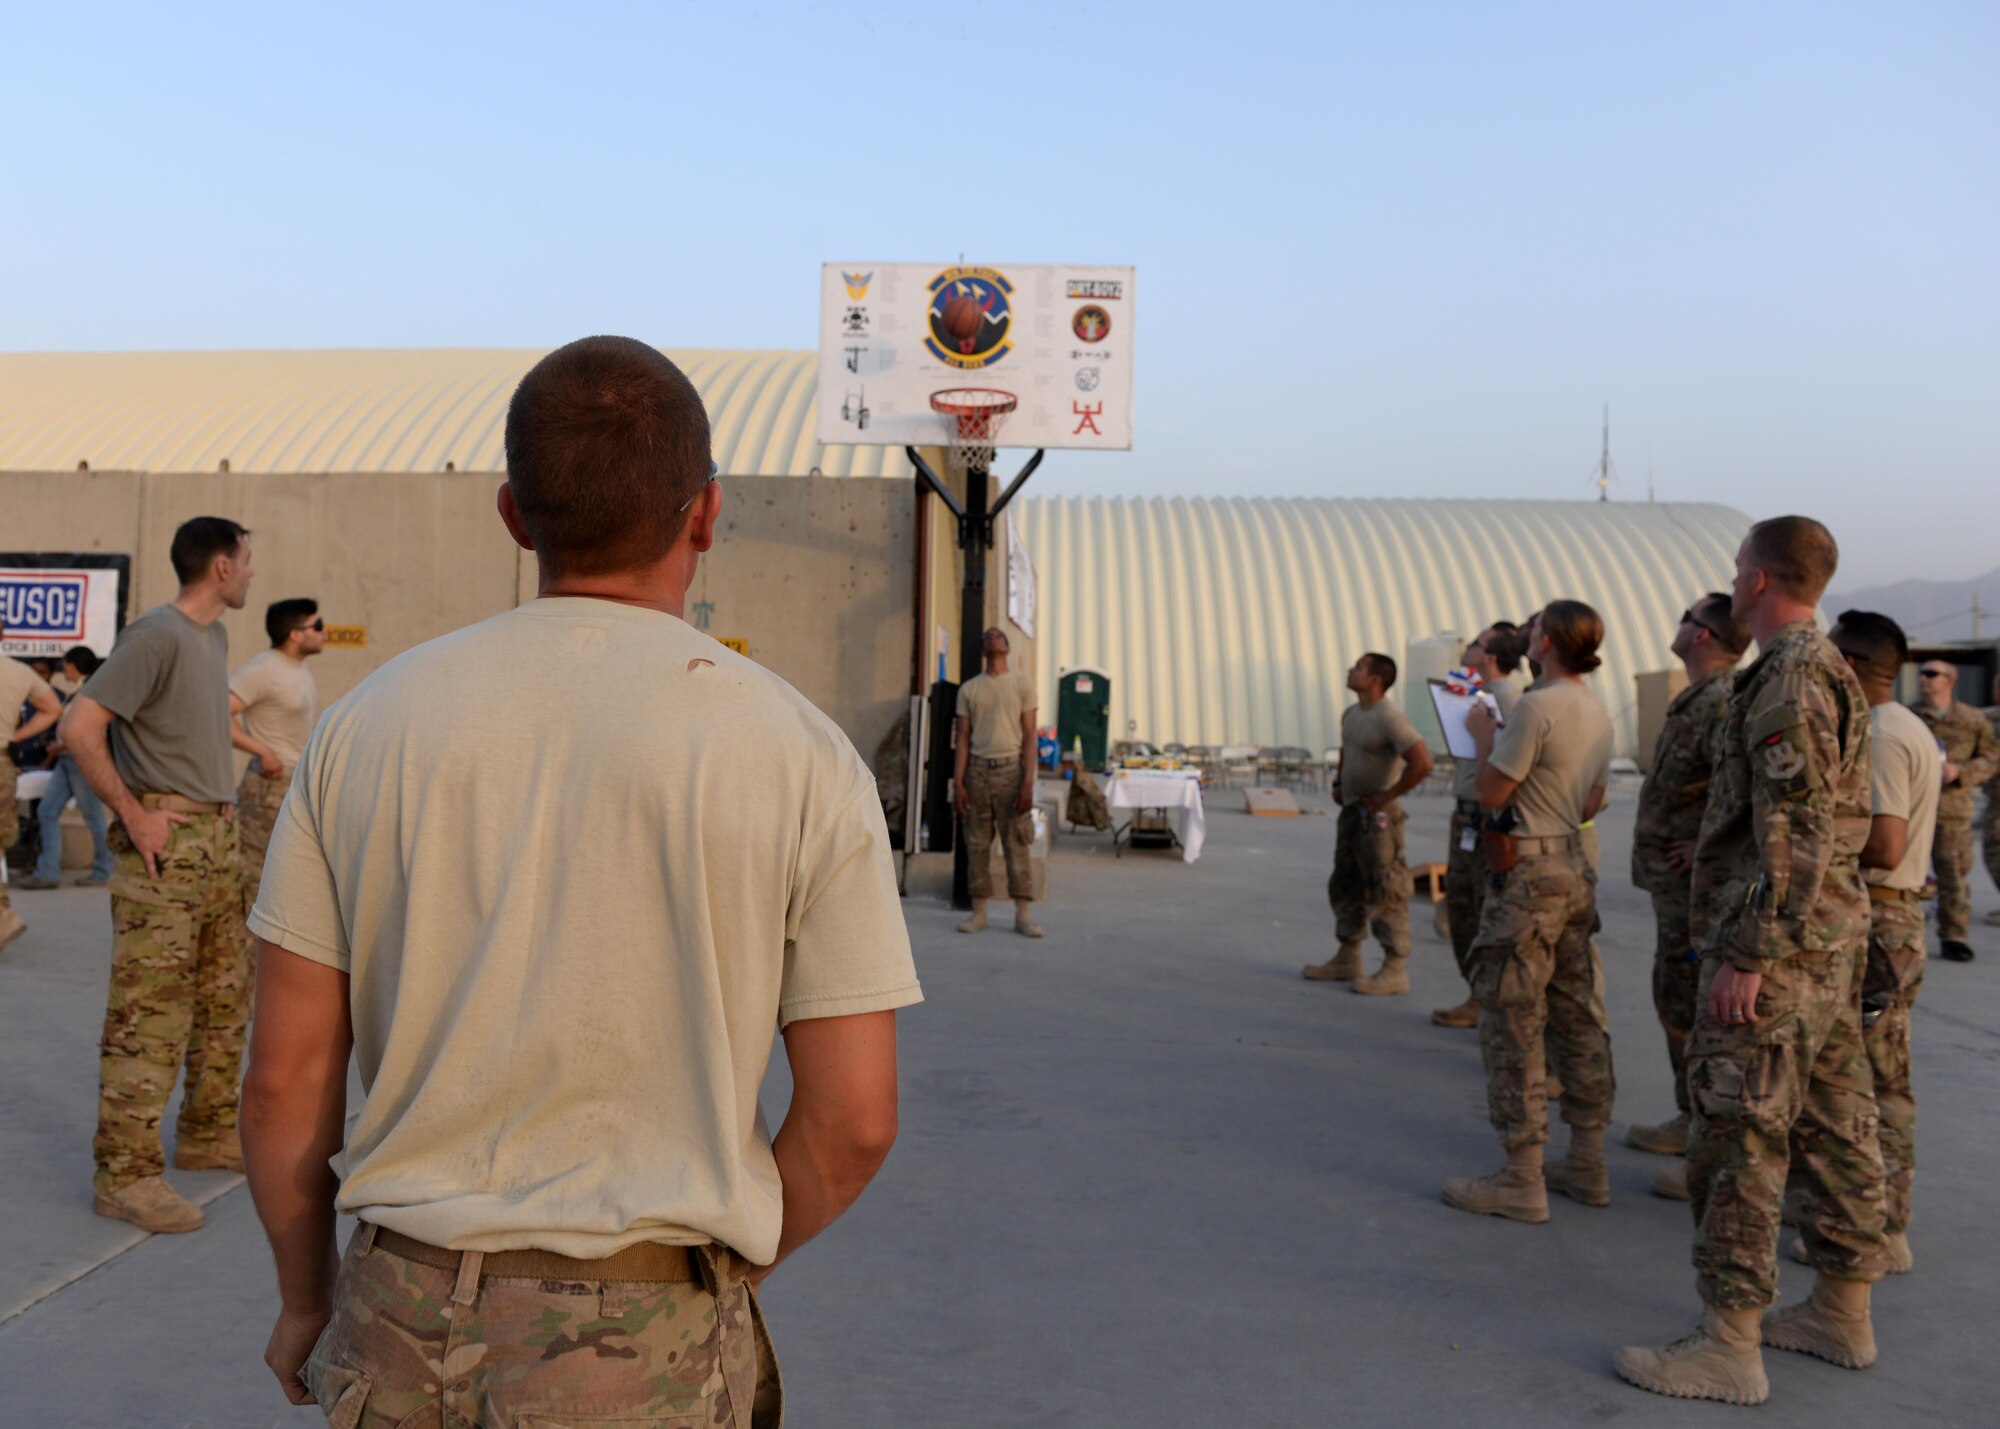 U.S. Airmen assigned to the 455th Air Expeditionary Wing participate in a three point shootout contest during an Air Force birthday celebration Sept. 18, 2015, at Bagram Airfield, Afghanistan. The block party which was hosted by the Armed Forces Committed to Excellence council, the 455th Force Support Squadron and other private organizations featured games, food and a traditional AF cake cutting ceremony. (U.S. Air Force photo by Senior Airman Cierra Presentado/Released)